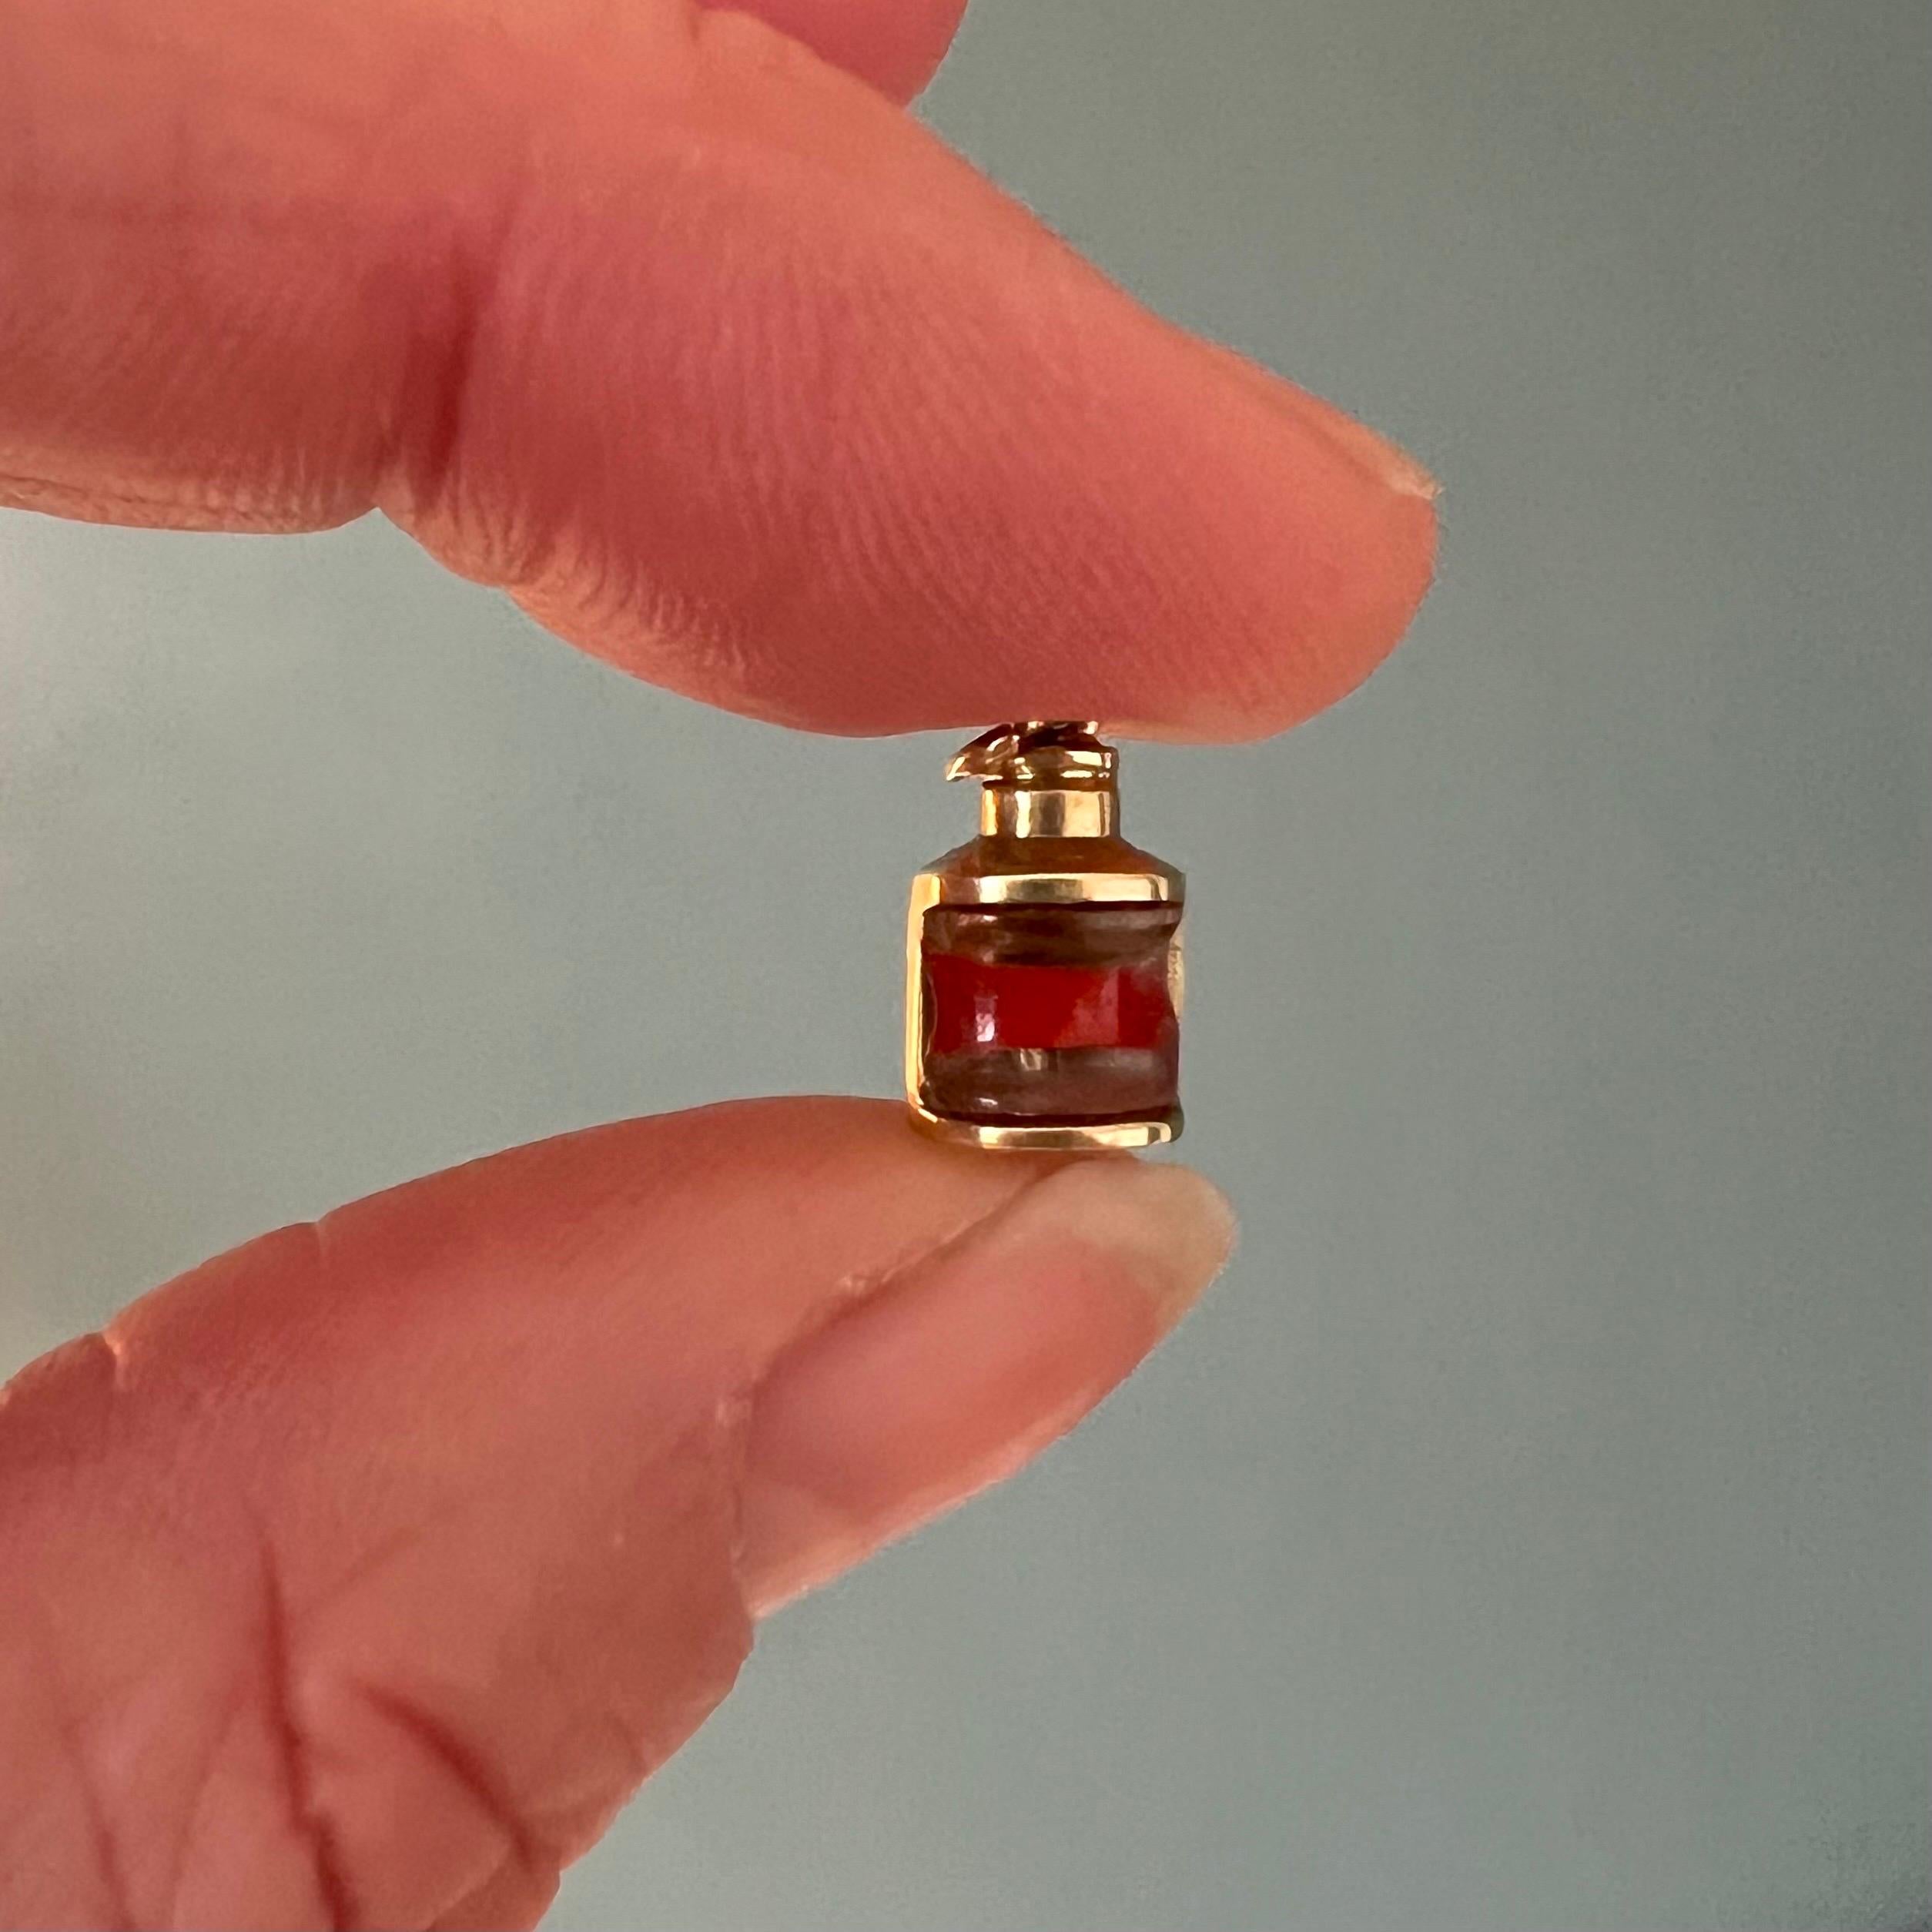 A lovely small vintage 14 karat gold lantern charm pendant. The cute lantern is beautifully detailed and is set with glass and a red stripe in the center which indicates the lit fuse of the lantern.

Collect your own charms as wearable memories, it